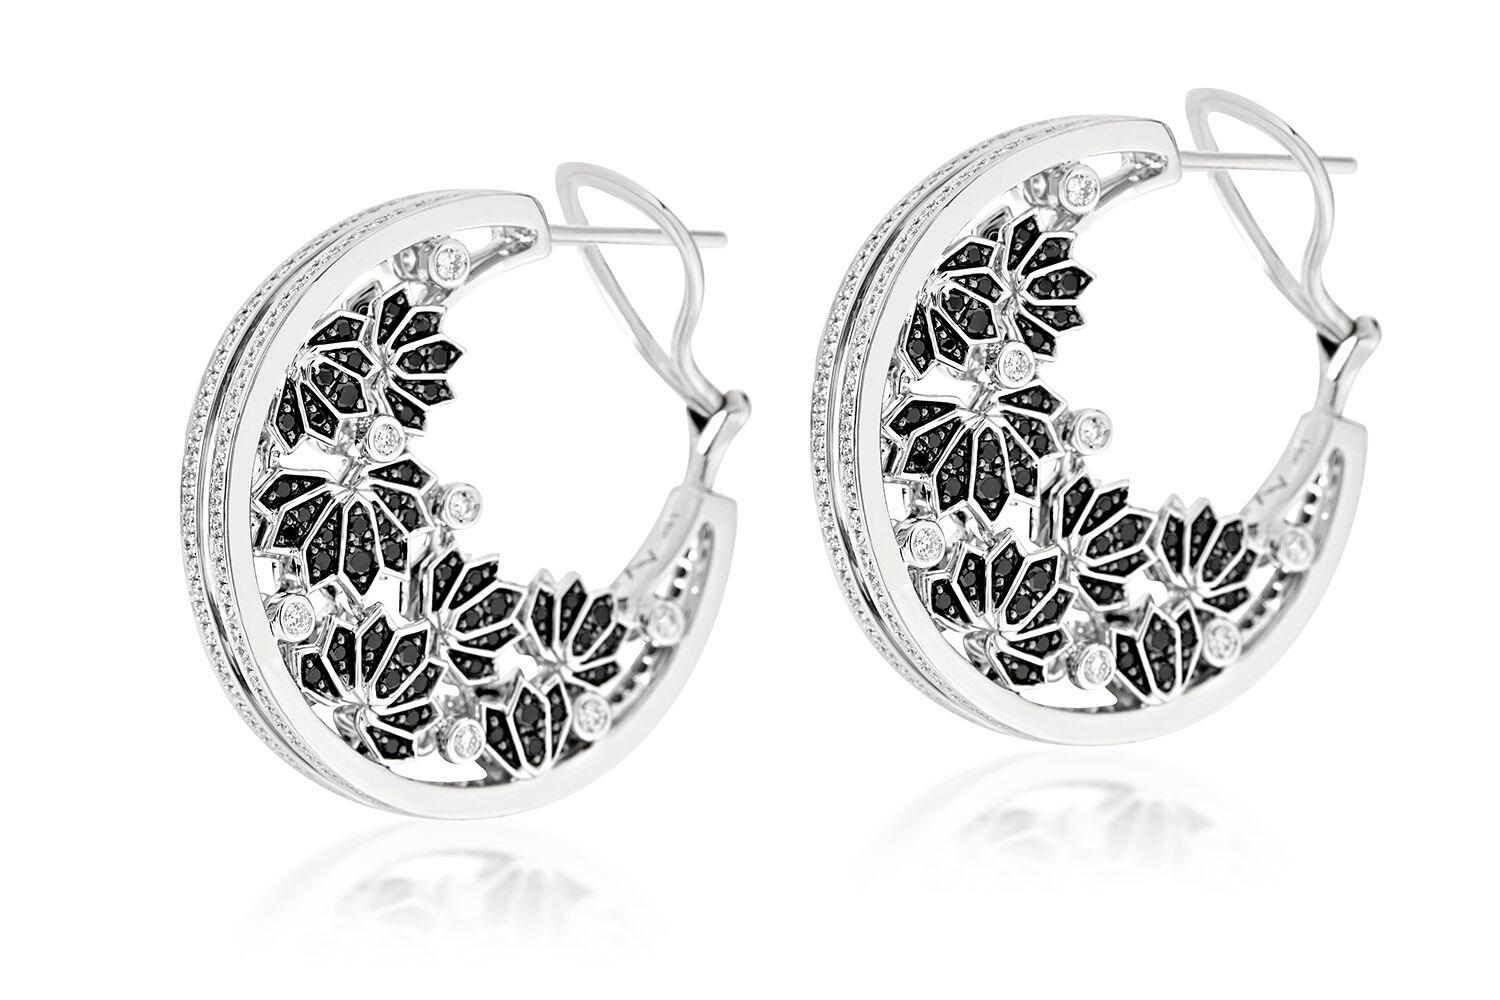 ANANYA LOTUS SAMSARA EARRINGS SET WITH DIAMONDS


Set in 18K White gold


Total diamond weight: 1.75 ct
Color: F-G
Clarity: VVS1

Total black diamond weight: 1.53 ct

32mm drop